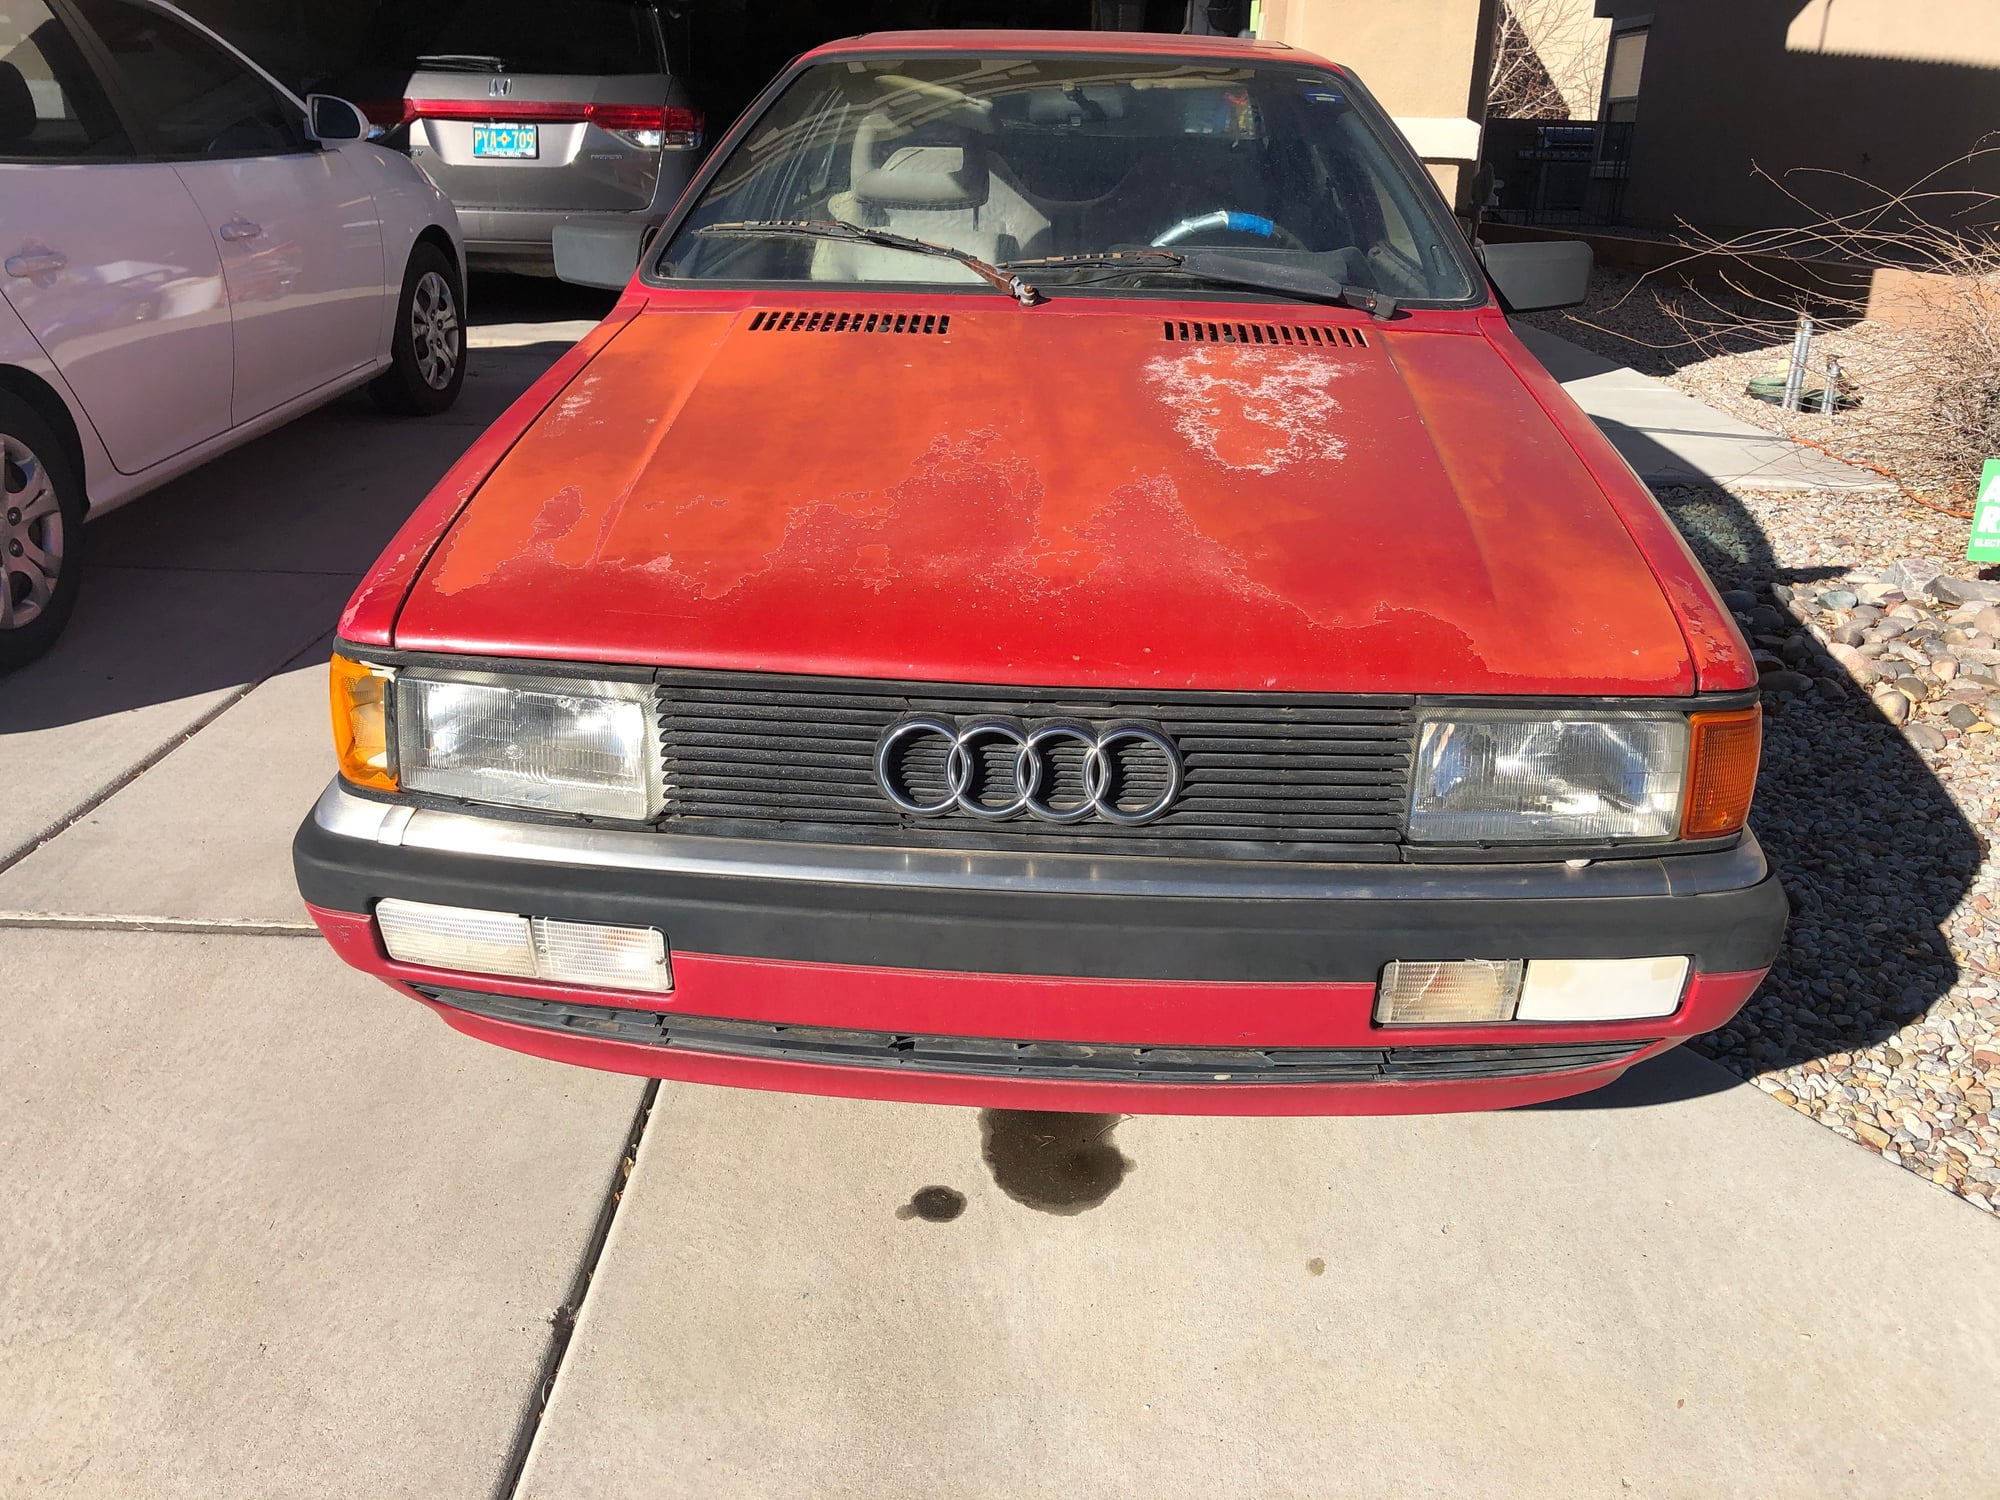 1986 Audi Coupe - 1986 Audi Coupe GT FWD - Used - VIN WAUBD085XGA064576 - 2WD - Manual - Coupe - Red - Albuquerque, NM 87123, United States